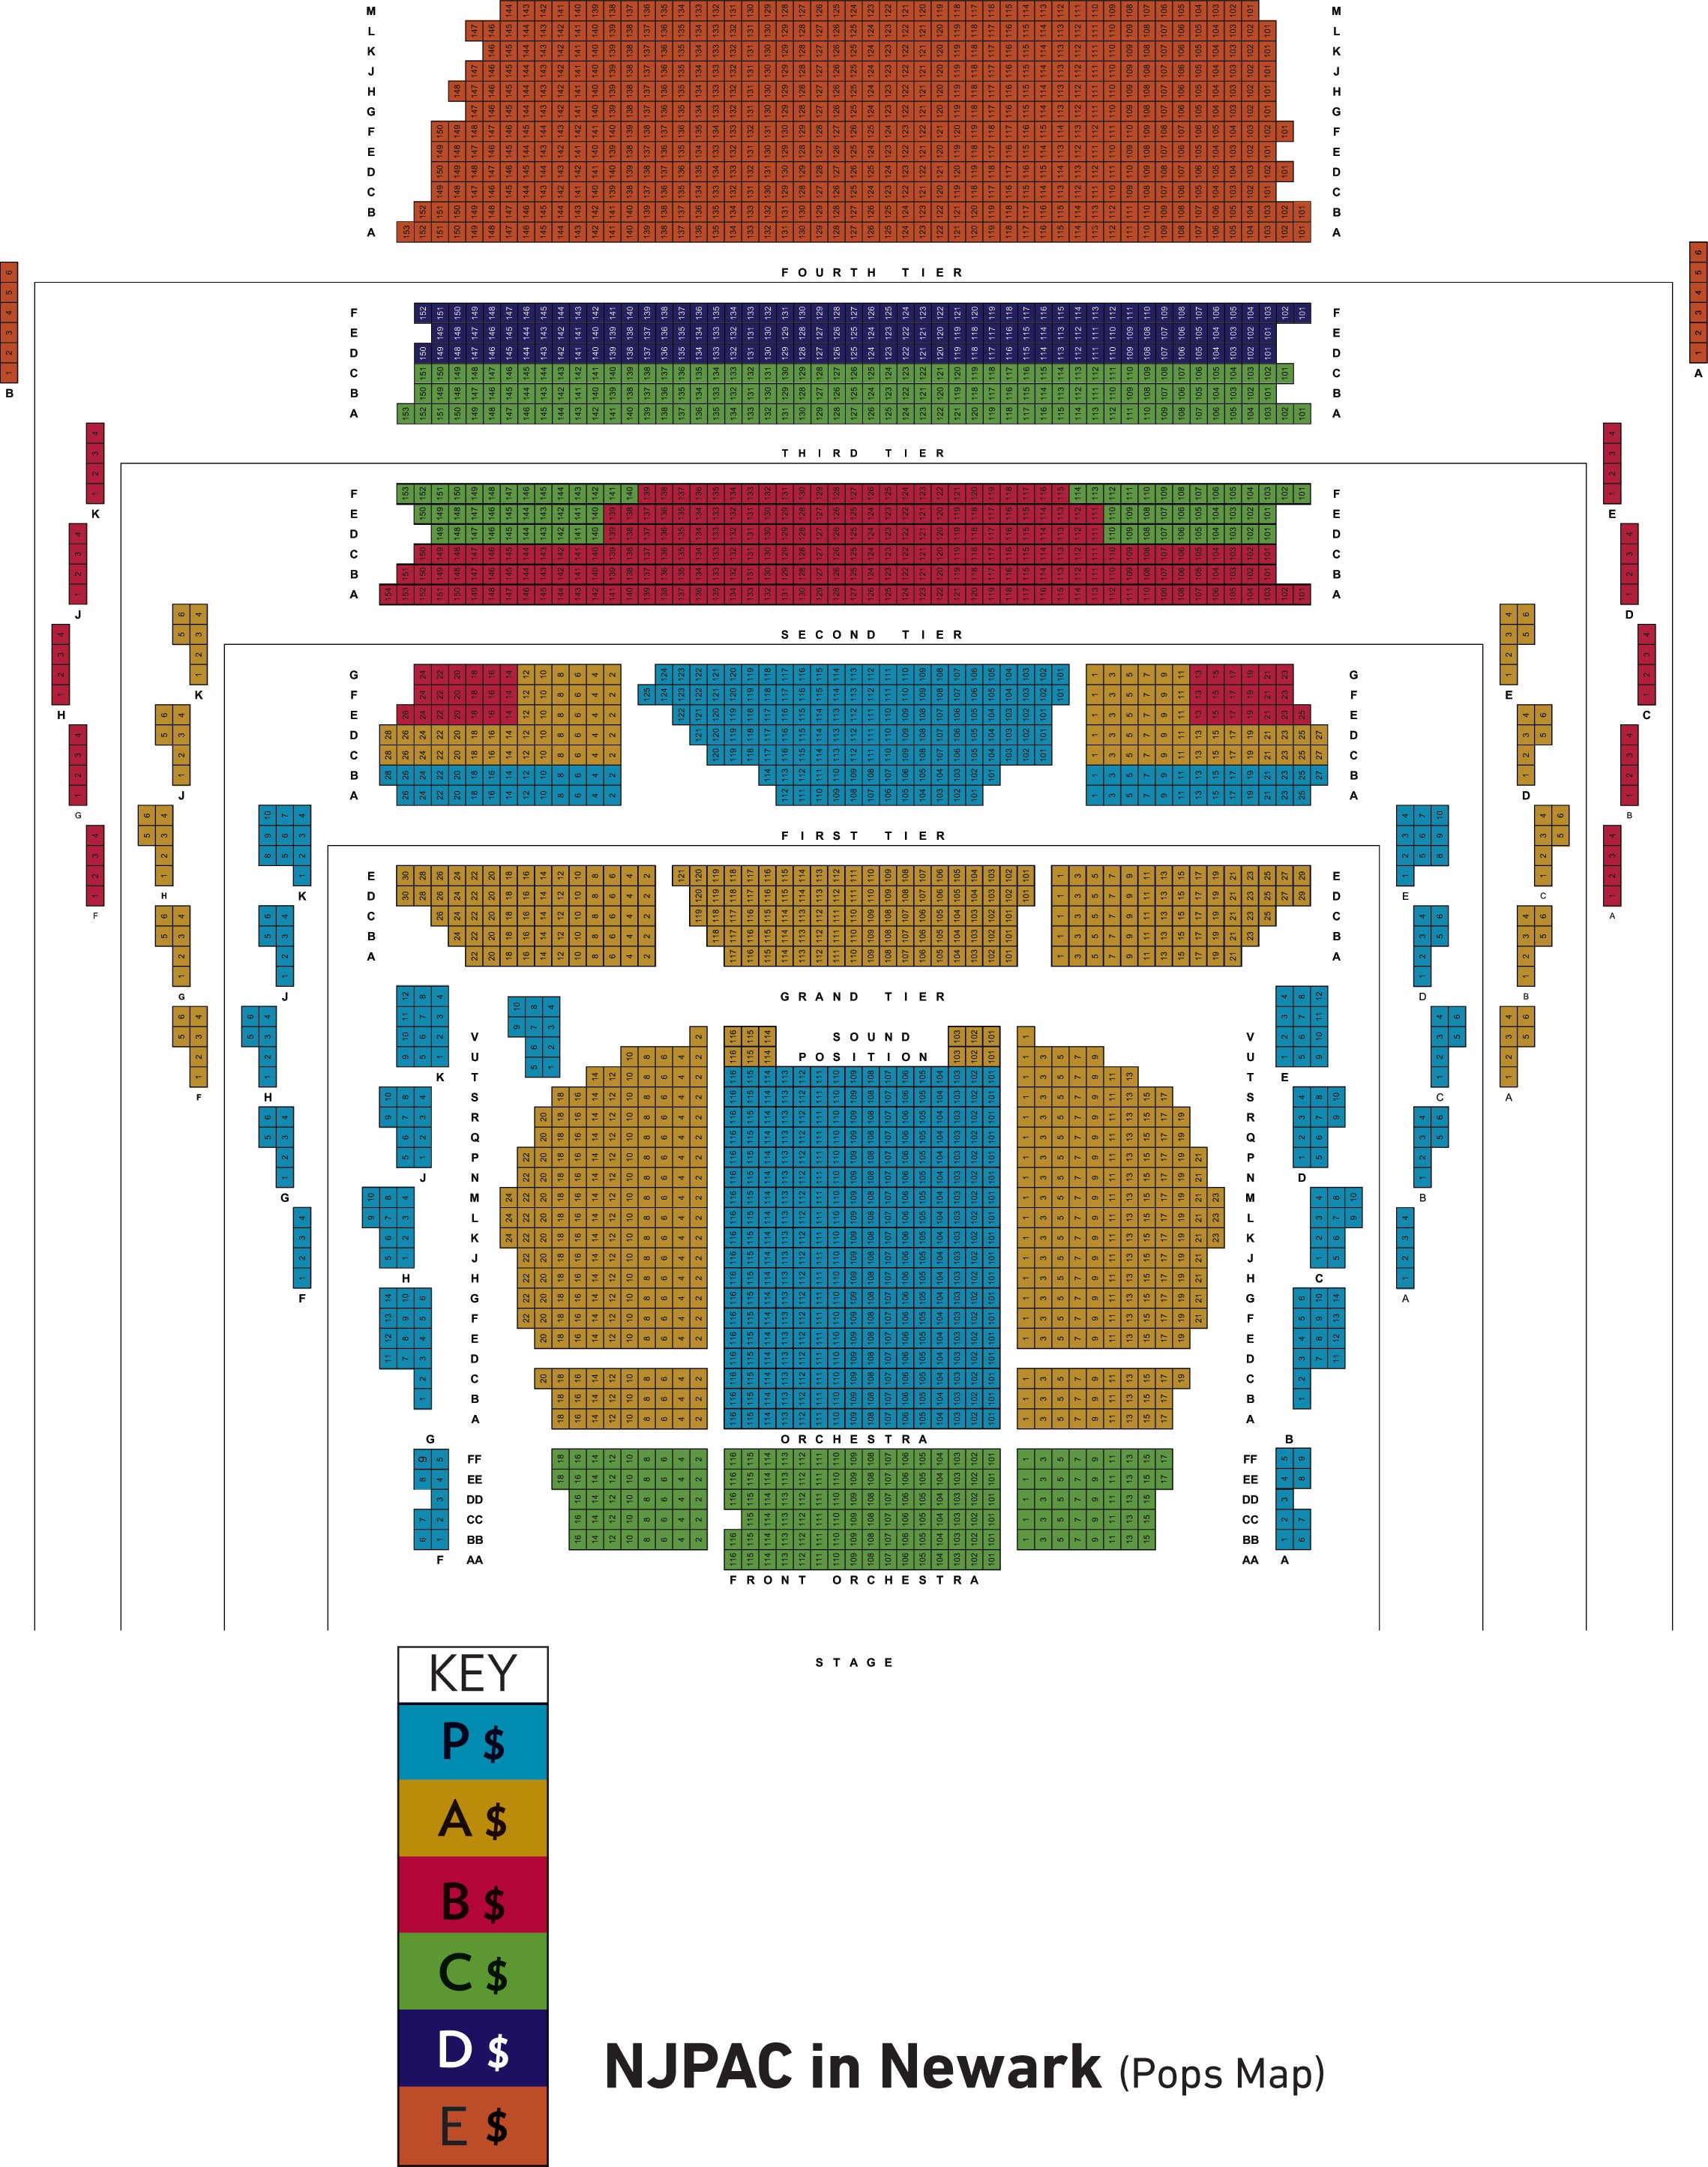 New Jersey Performing Arts Center Seating Chart